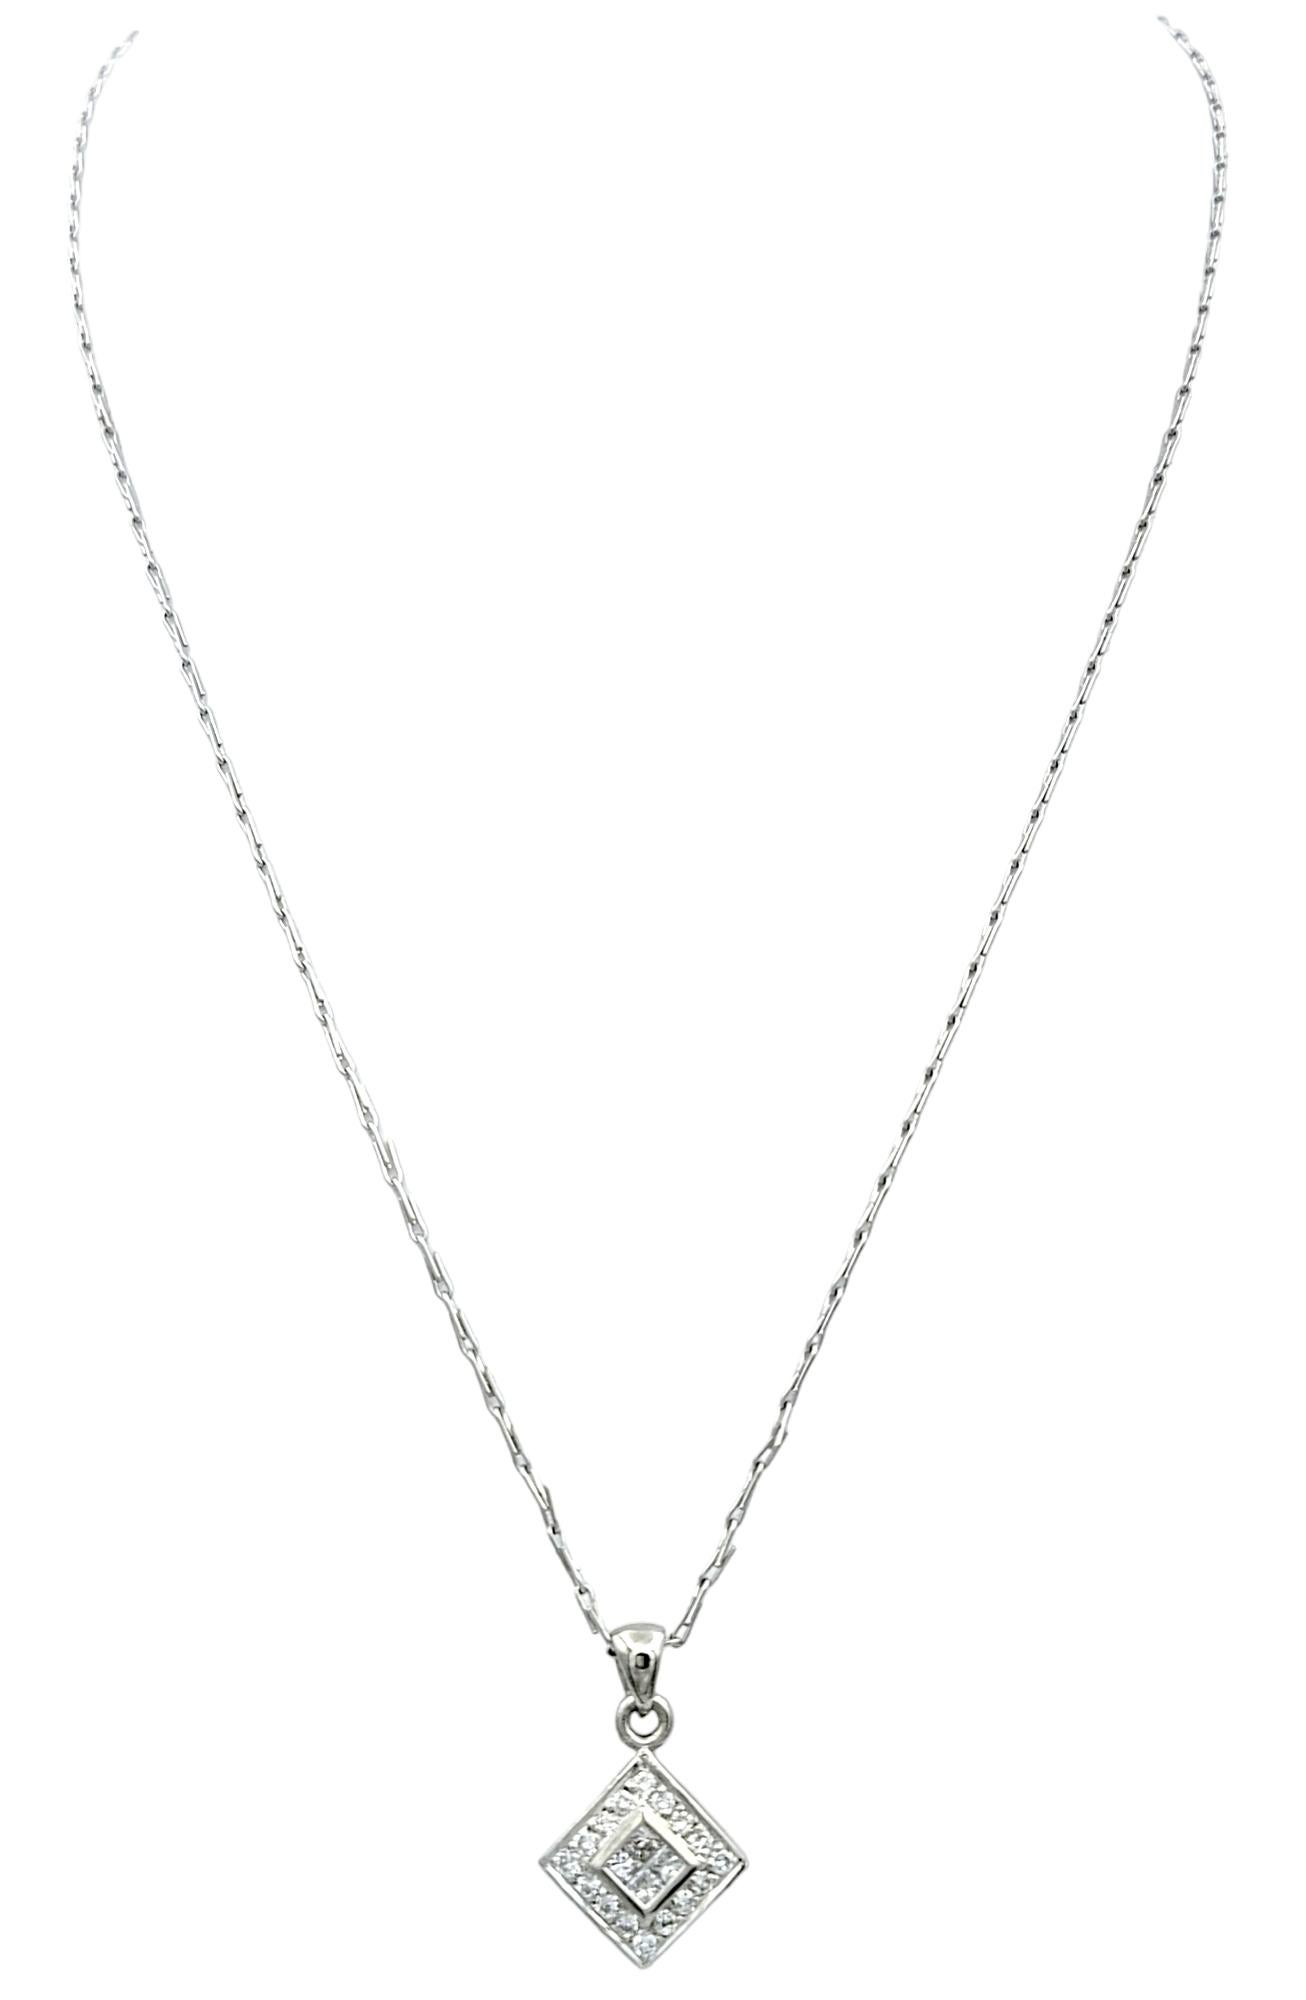 Princess Cut Squared Diamond Pendant Necklace with Halo and Link Chain in Polished Platinum For Sale